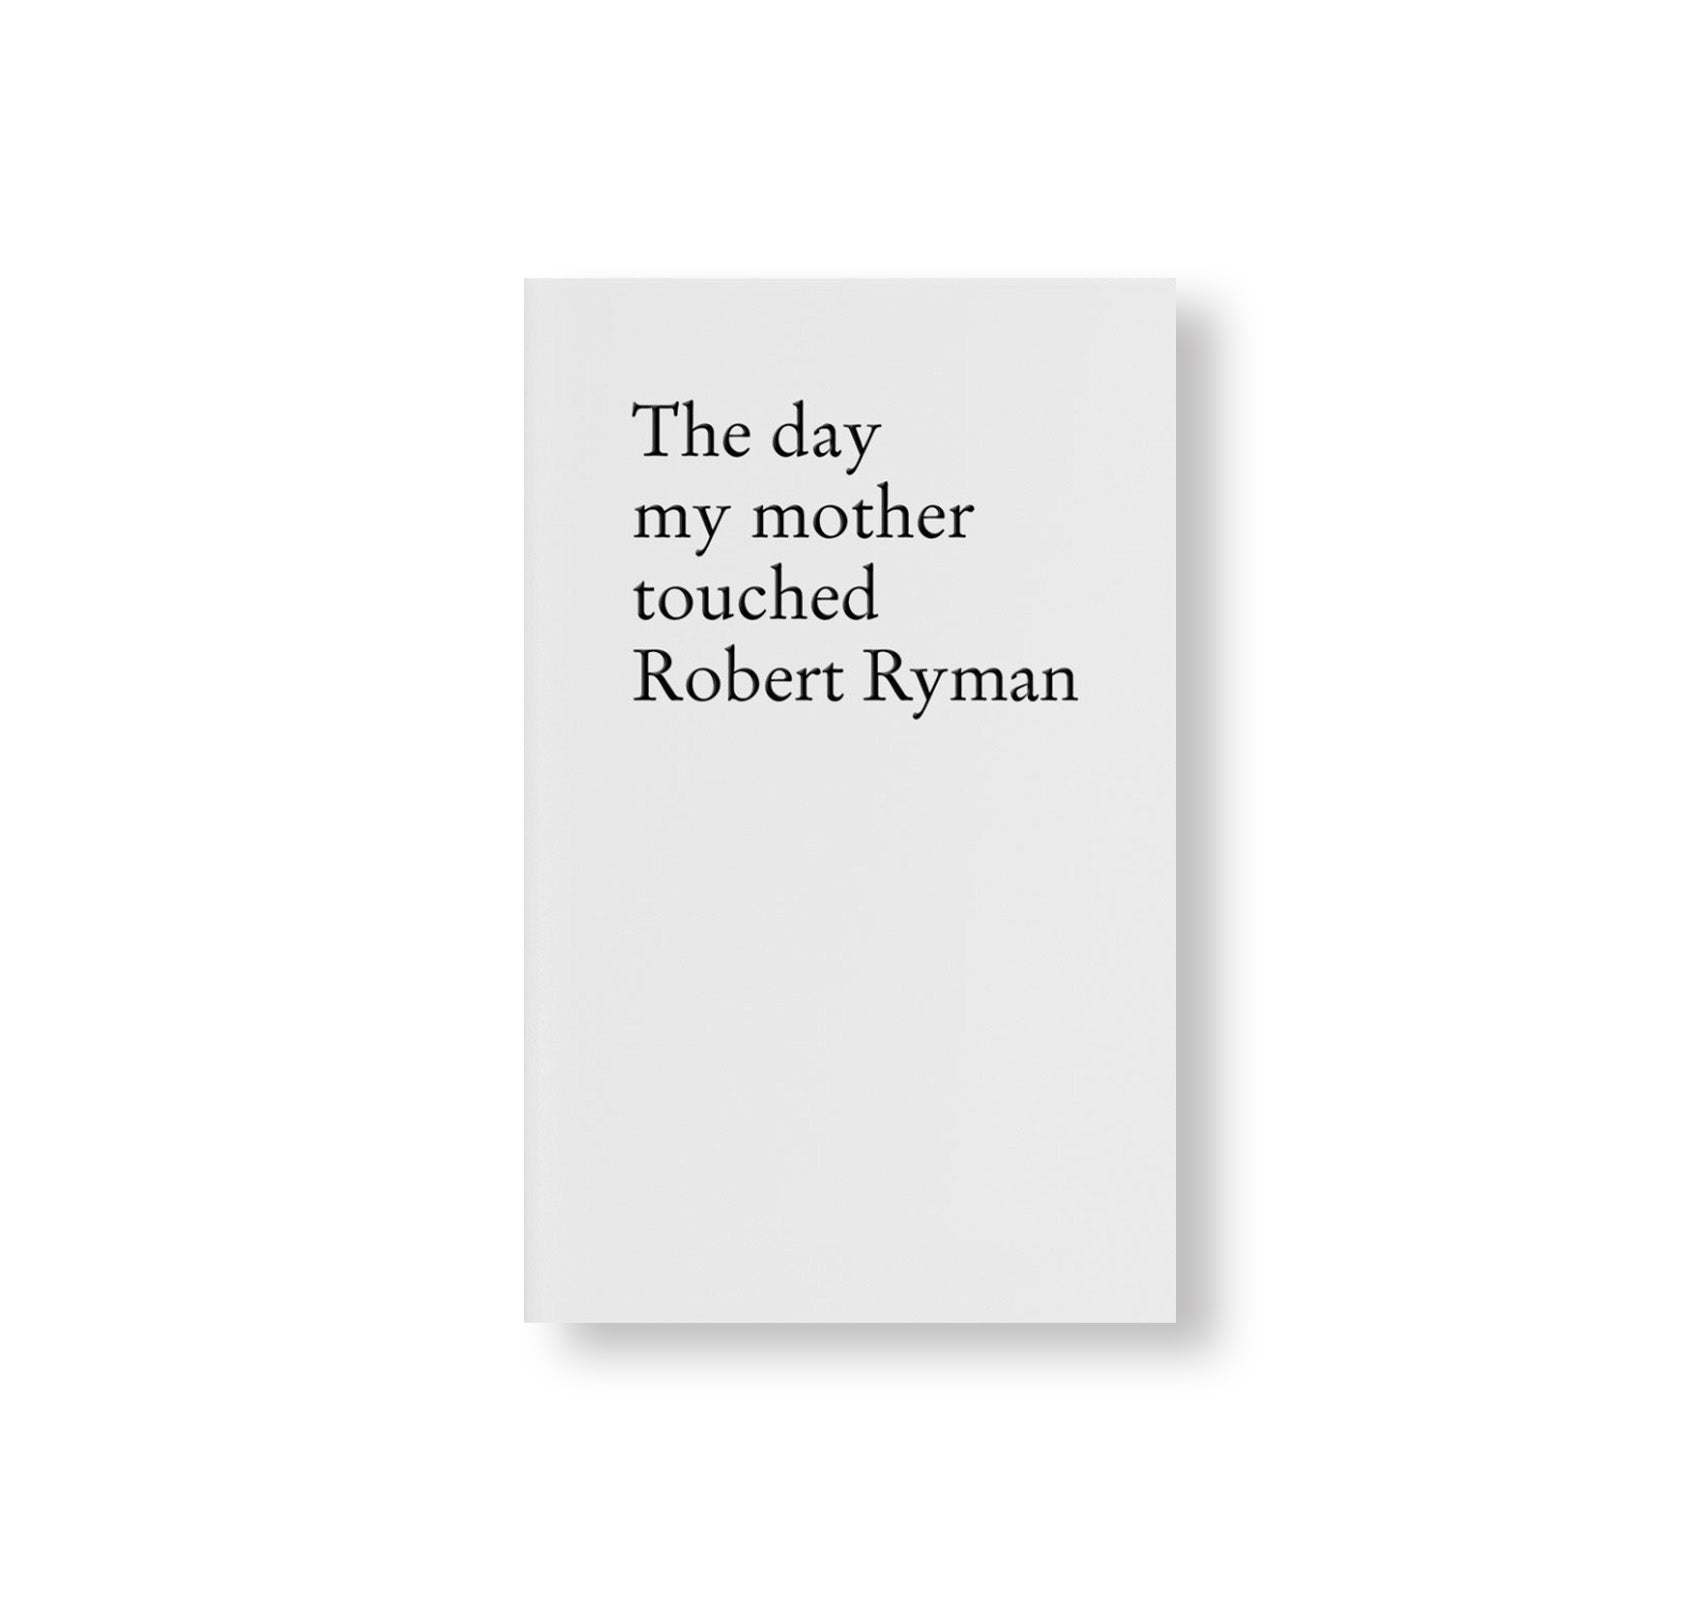 THE DAY MY MOTHER TOUCHED ROBERT RYMAN by Stefan Sulzer [THIRD EDITION]